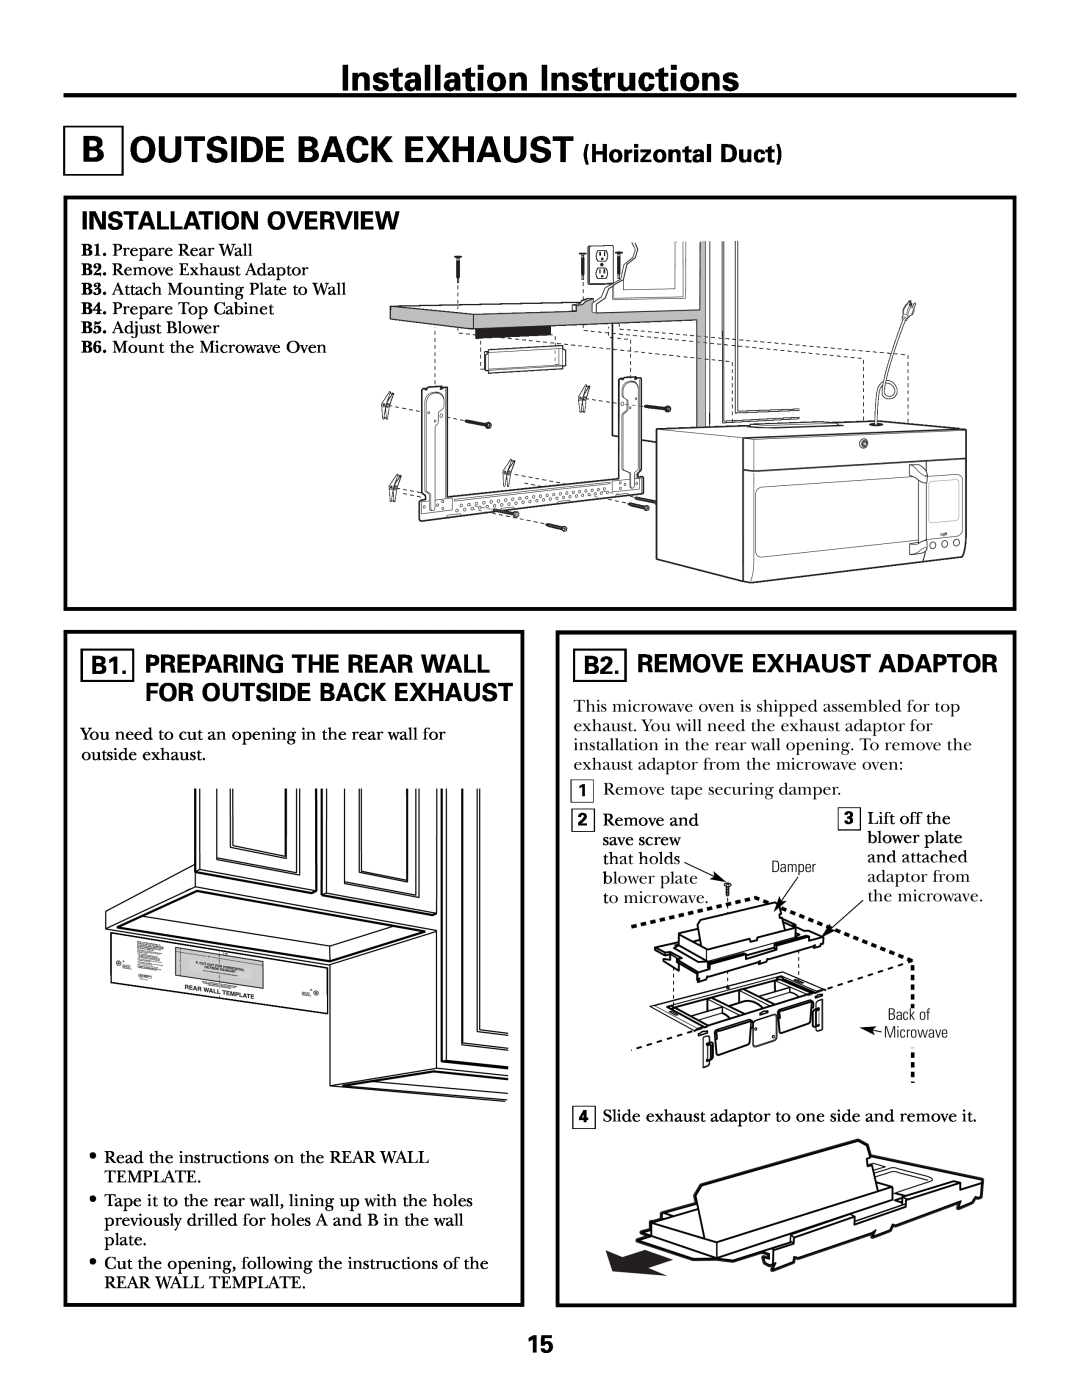 GE CVM2072 warranty Installation Instructions B OUTSIDE BACK EXHAUST Horizontal Duct, B2. REMOVE EXHAUST ADAPTOR 